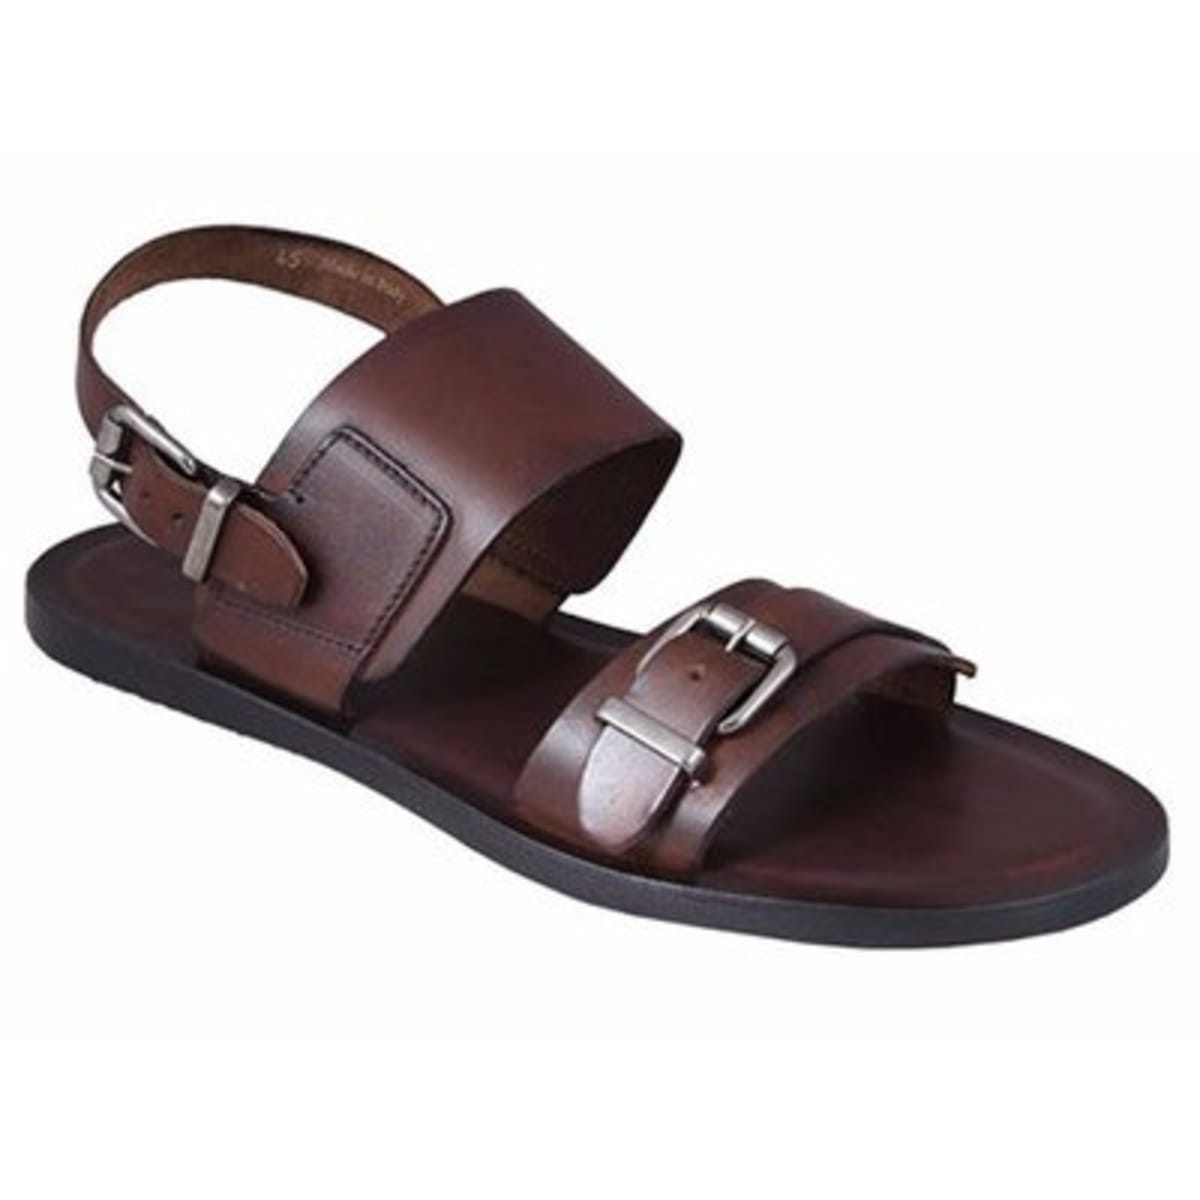 Sandals for Women and Men  Pillow Slippers  Double Buckle Adjustable  Slides  EVA Flat Sandals  China Sandals and Garden Shoes price   MadeinChinacom